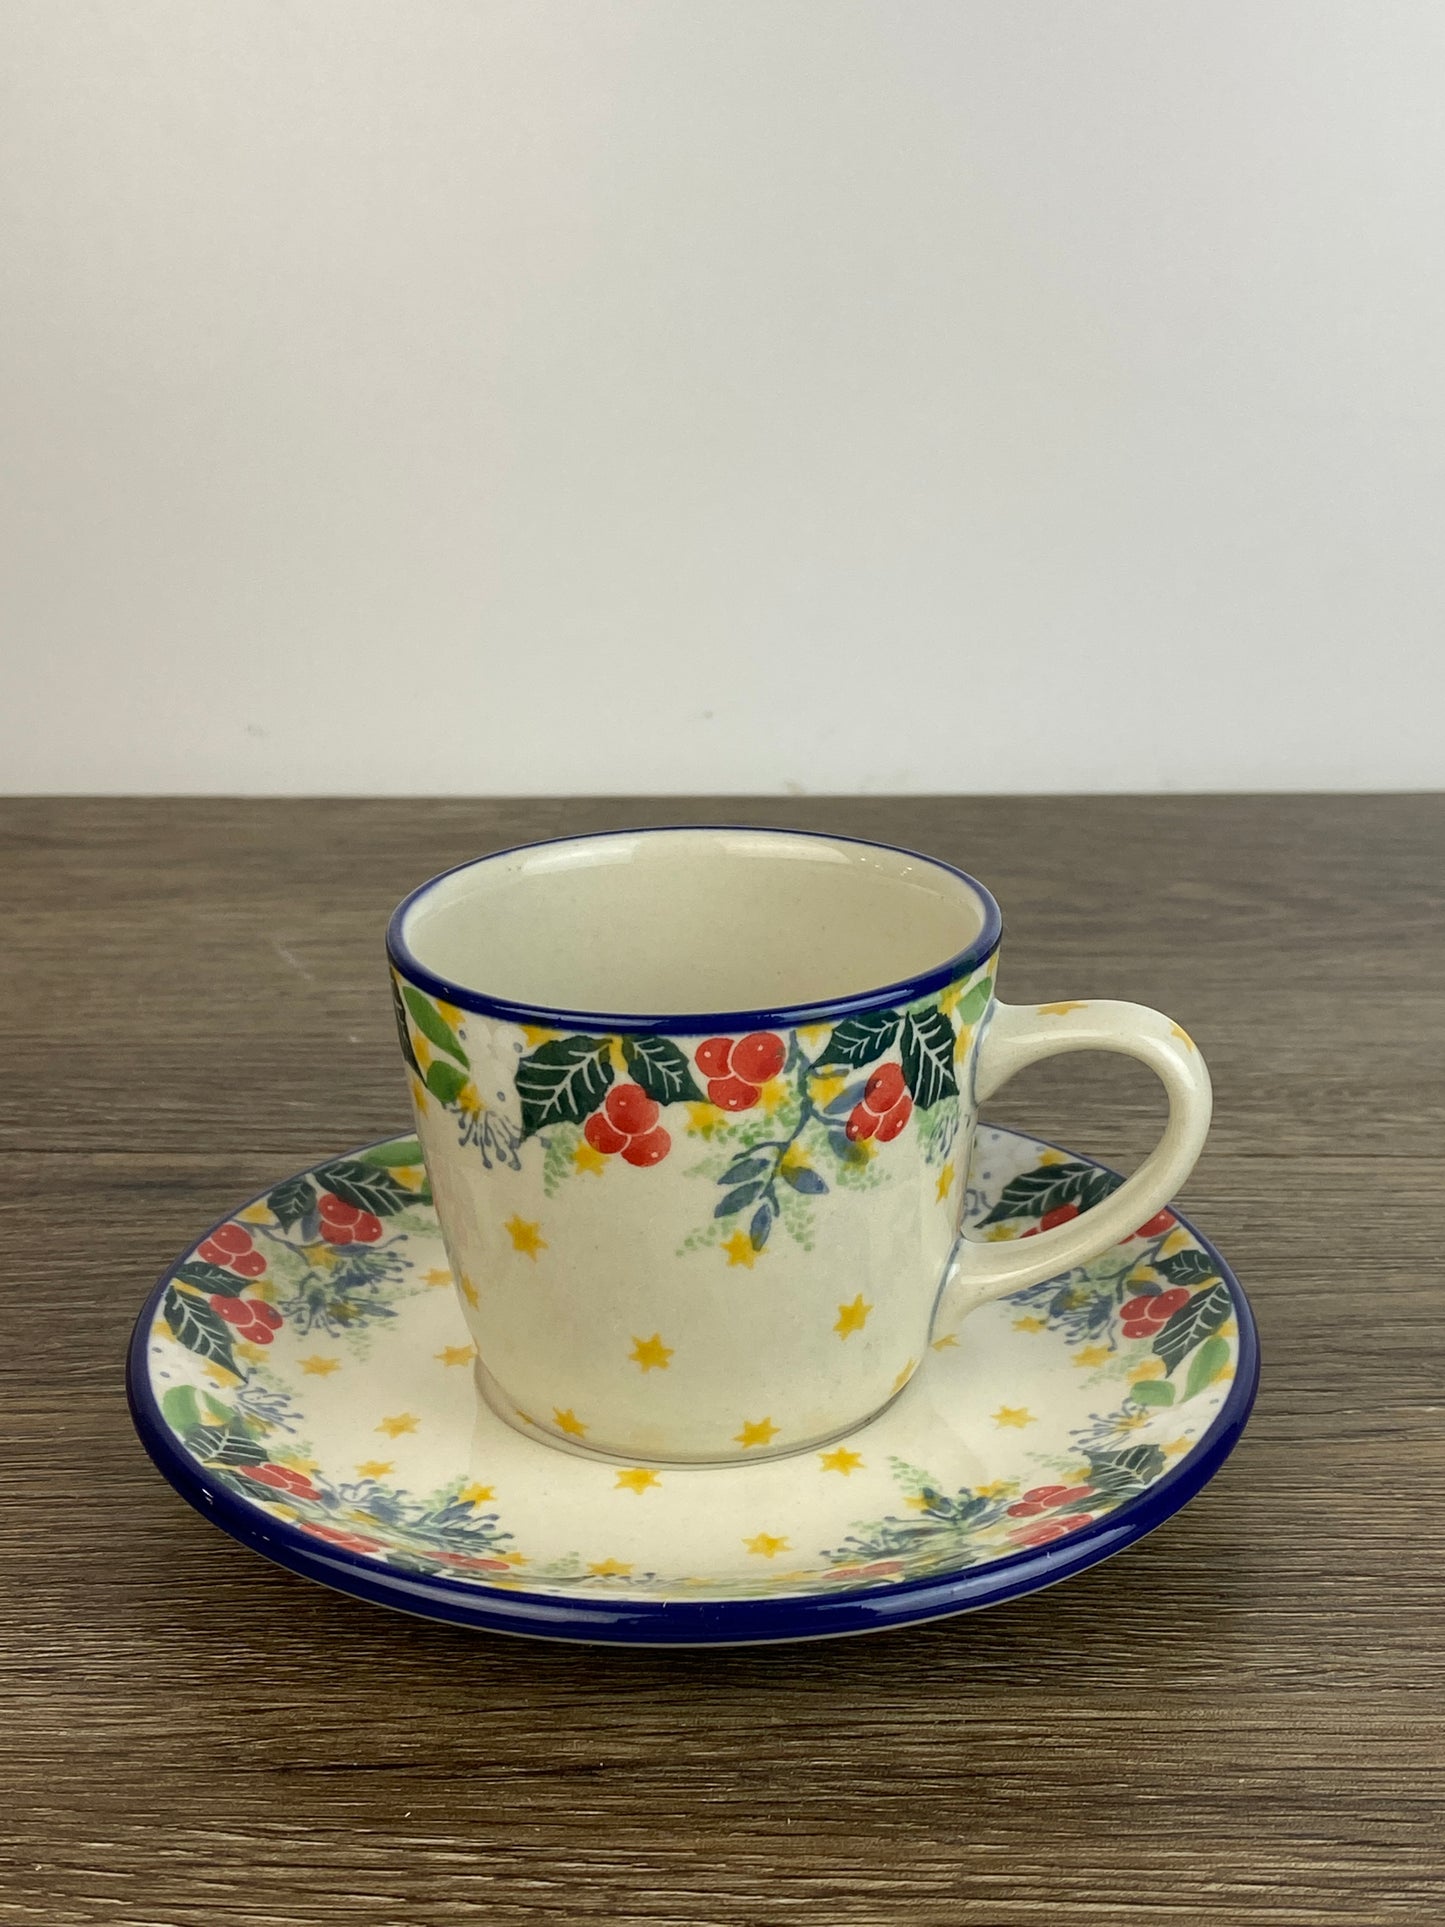 5oz Cup and Saucer - Pattern 2750